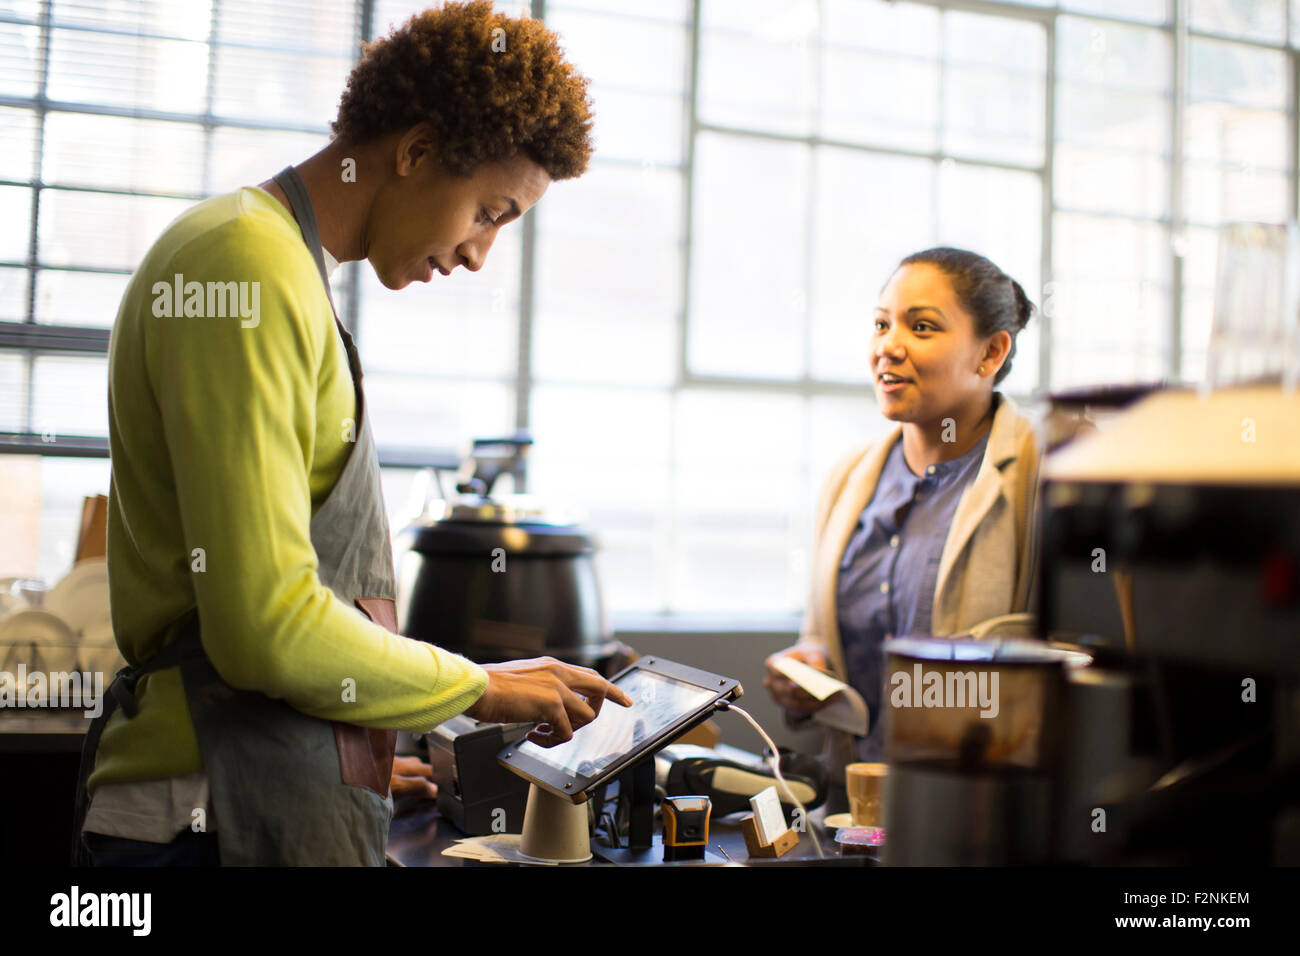 Mixed race barista assisting customer in coffee shop Stock Photo